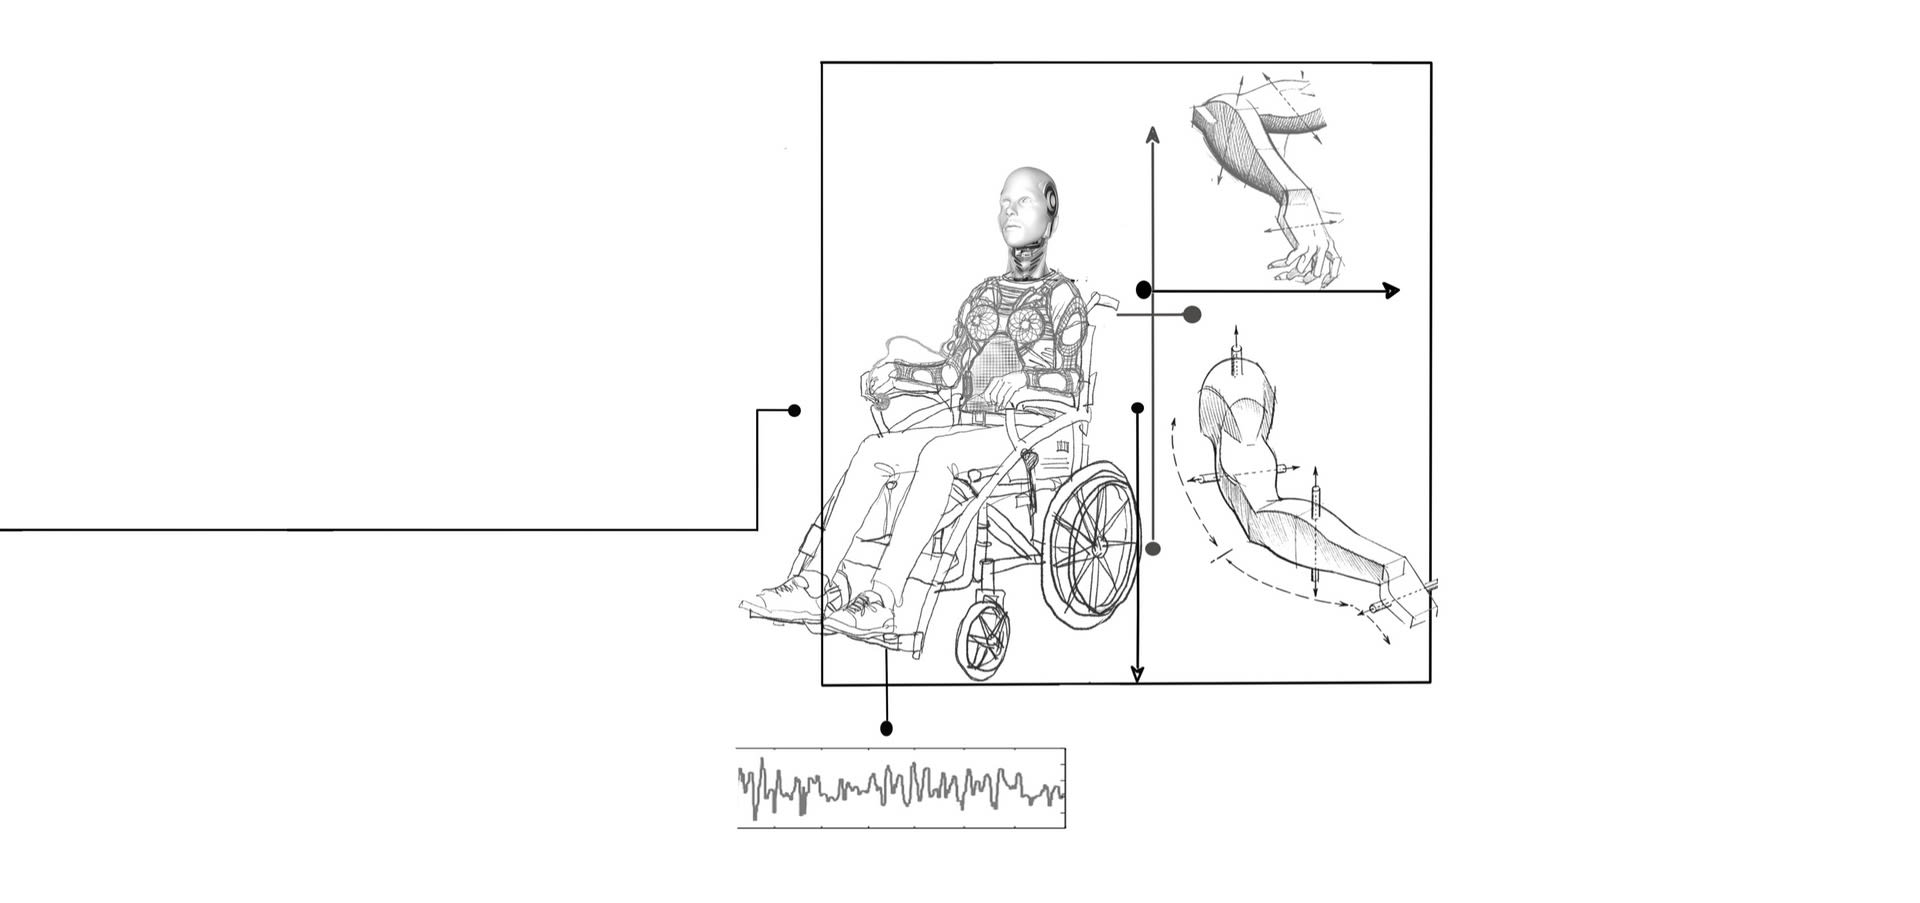 Image of a diagram of a figure sitting in a wheelchair, with further close-up diagrams of arms, in black on a white background.